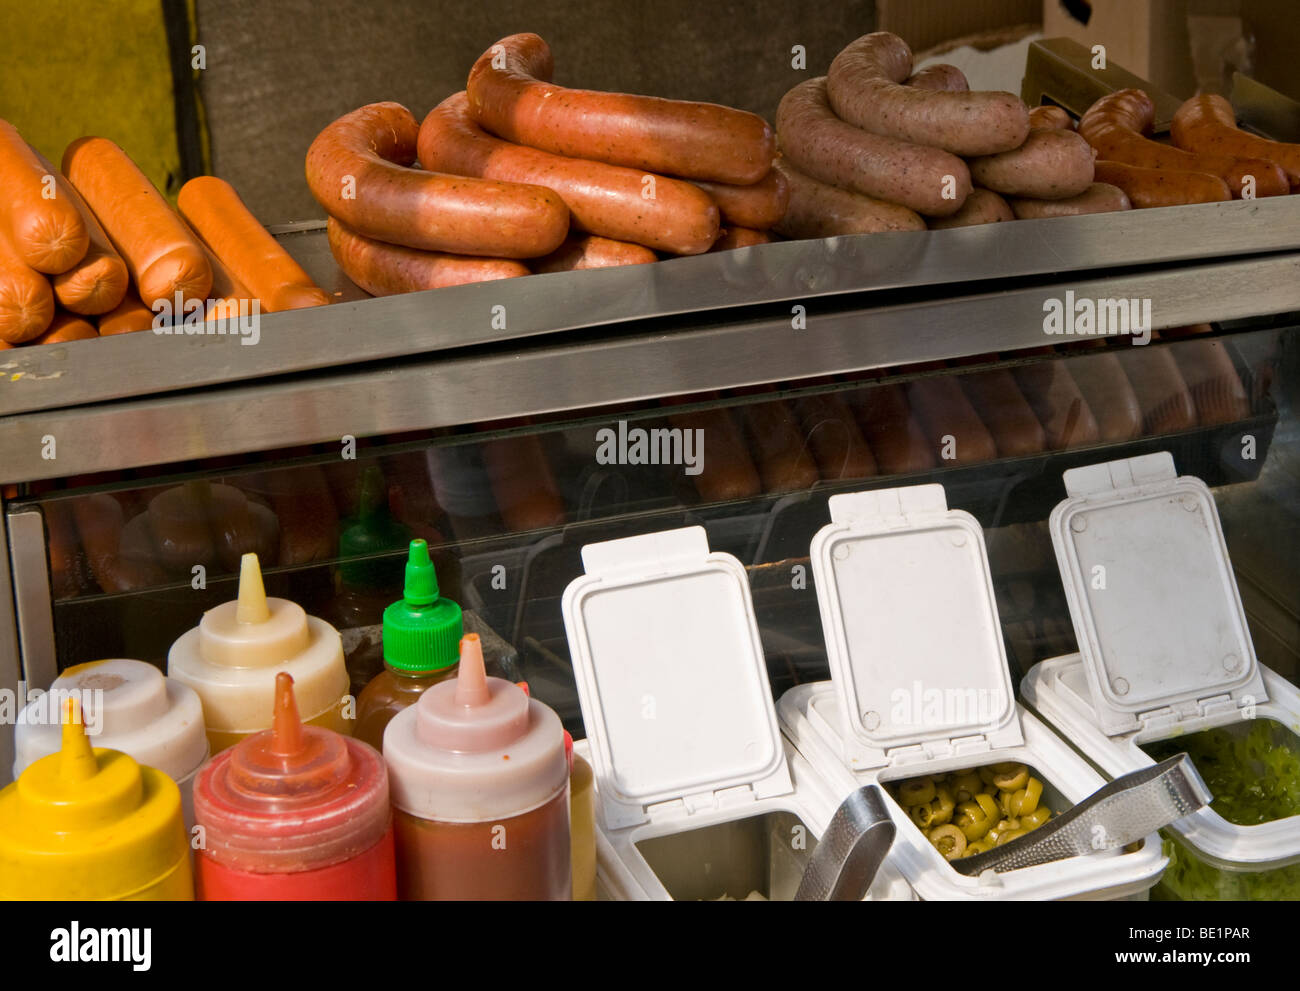 Hot Dogs & Accompaniments on Hot Dog Stand Stock Photo